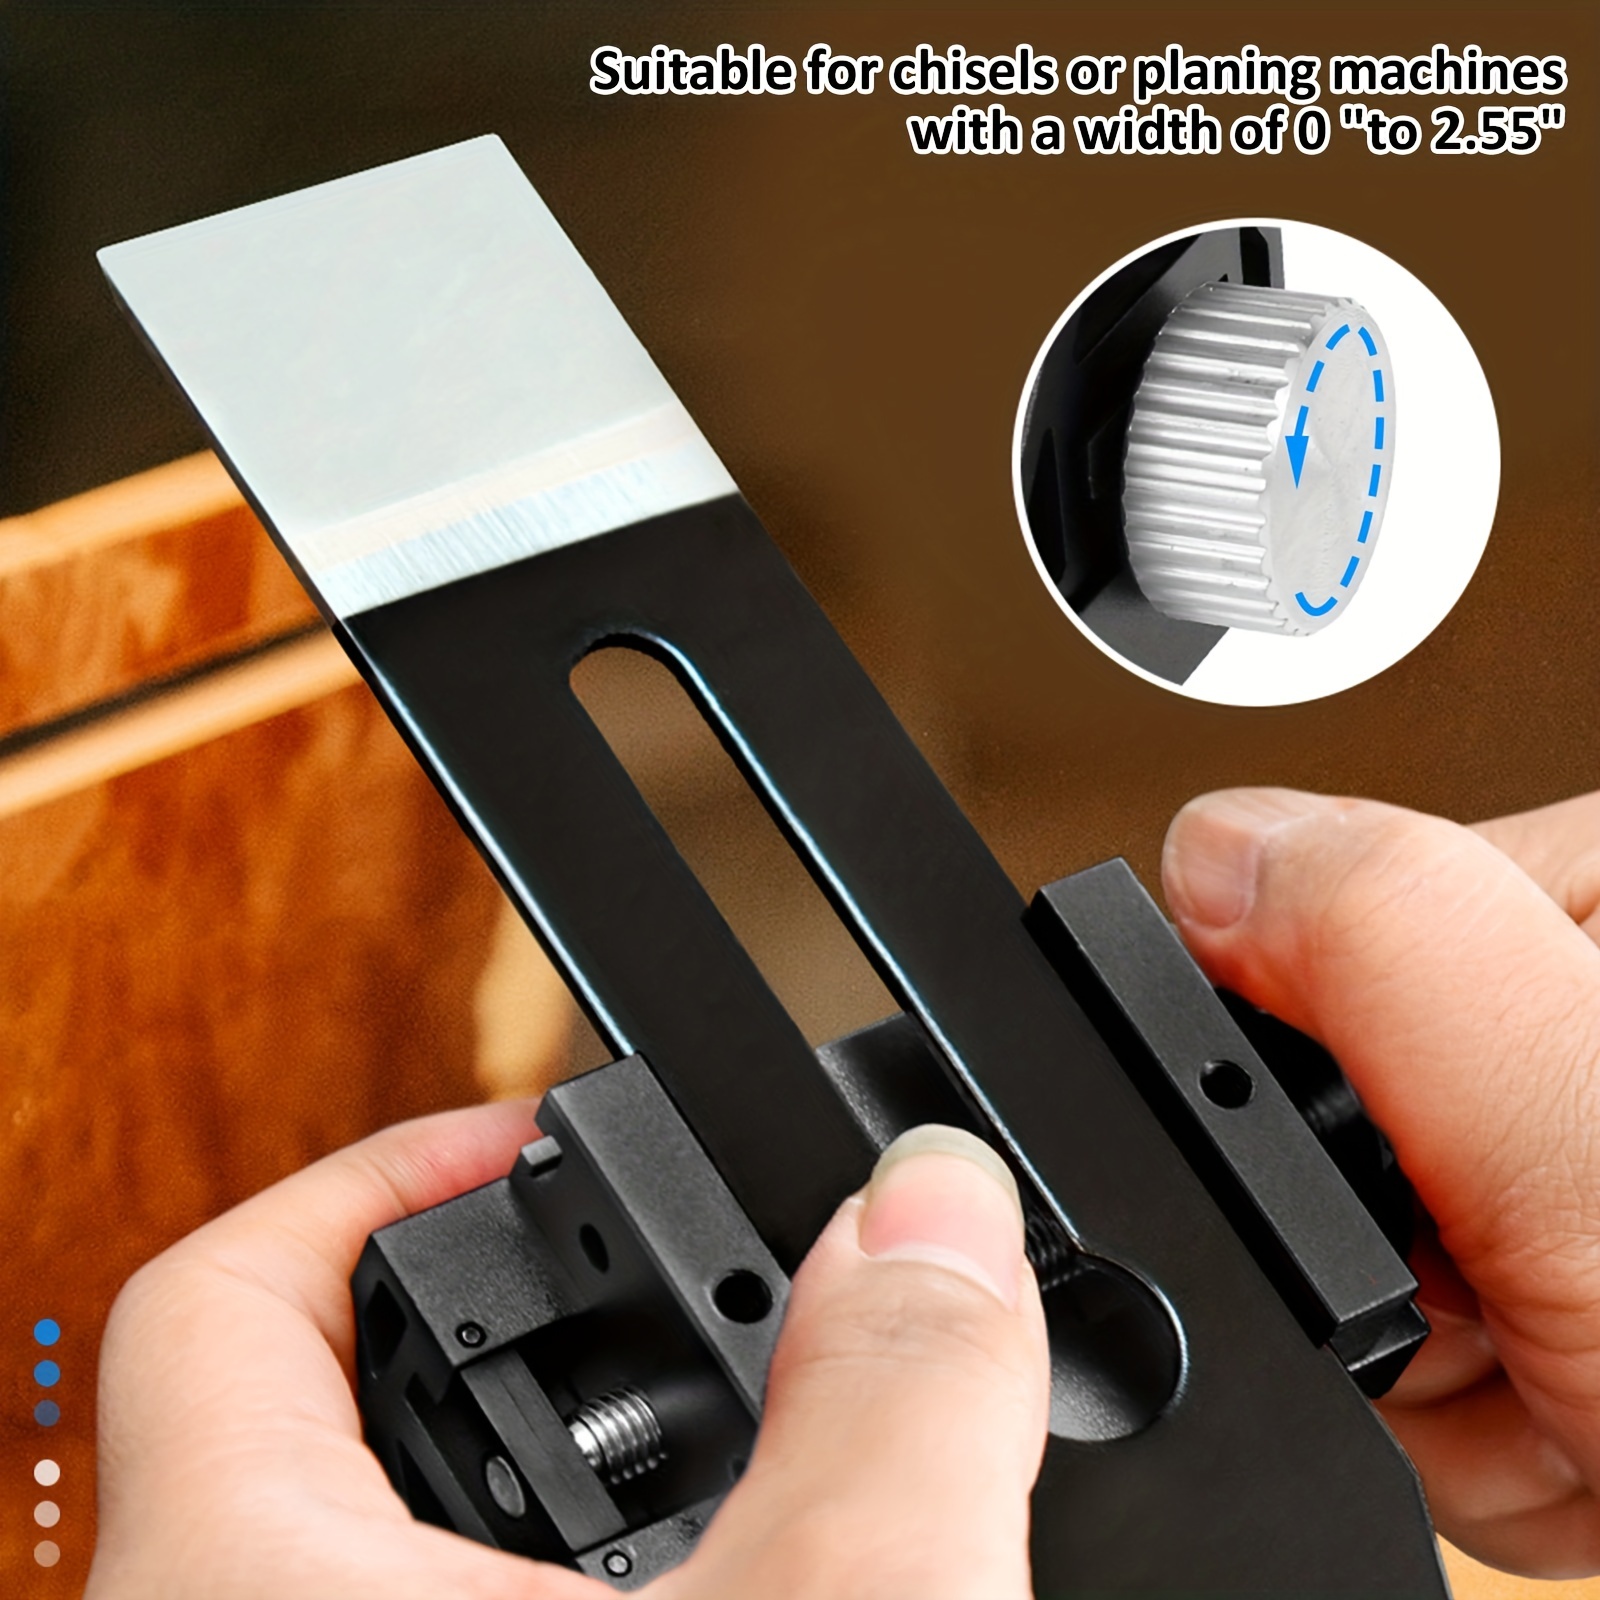 1pc Knife Guide Sharpening Aid - Knife Sharpener Angle Guide Only